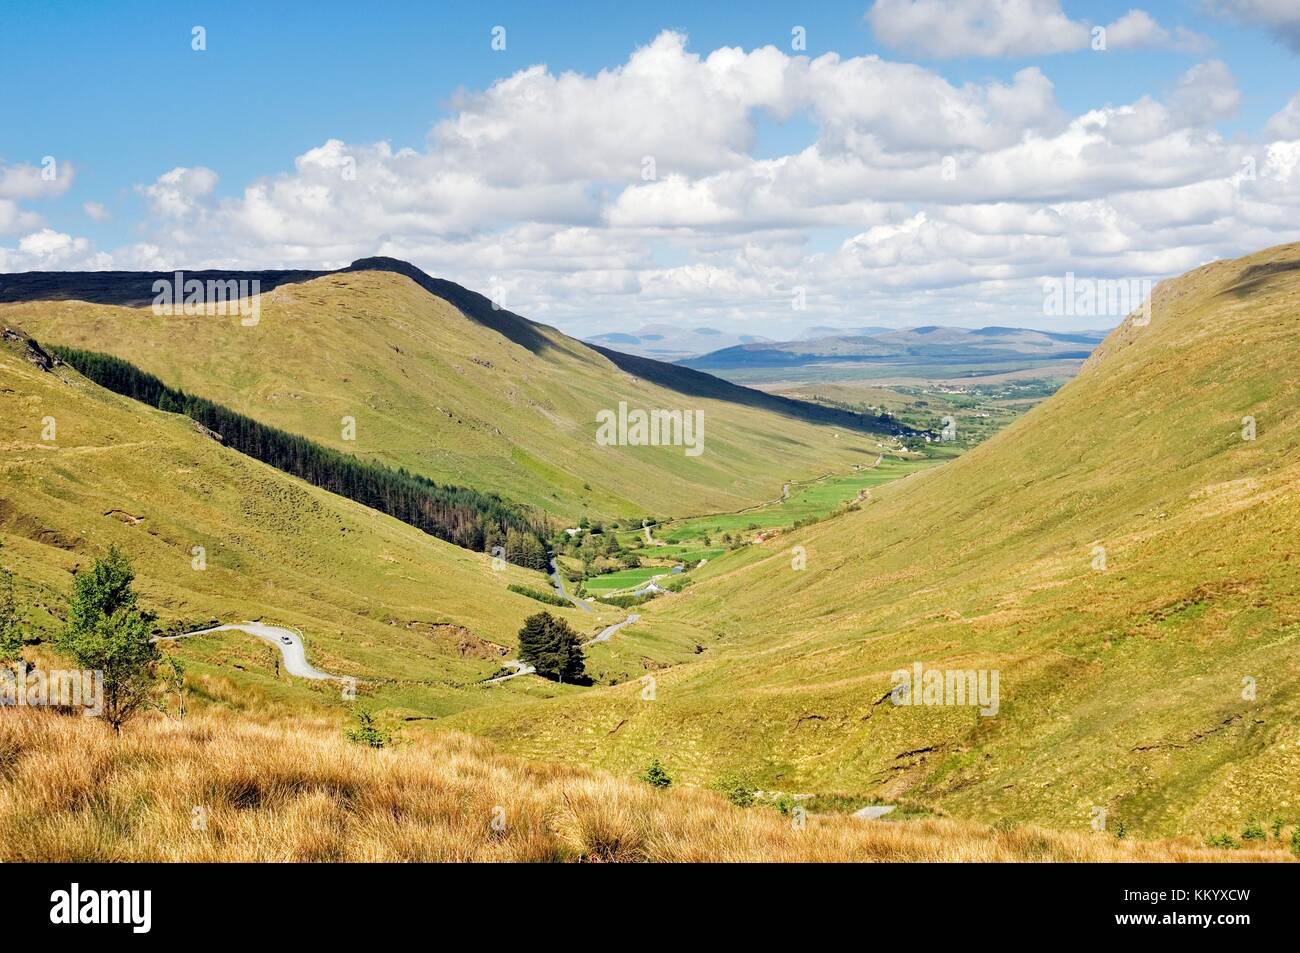 The mountain road from Glengesh Pass leads northeast toward the town of Ardara, County Donegal, Ireland. Stock Photo